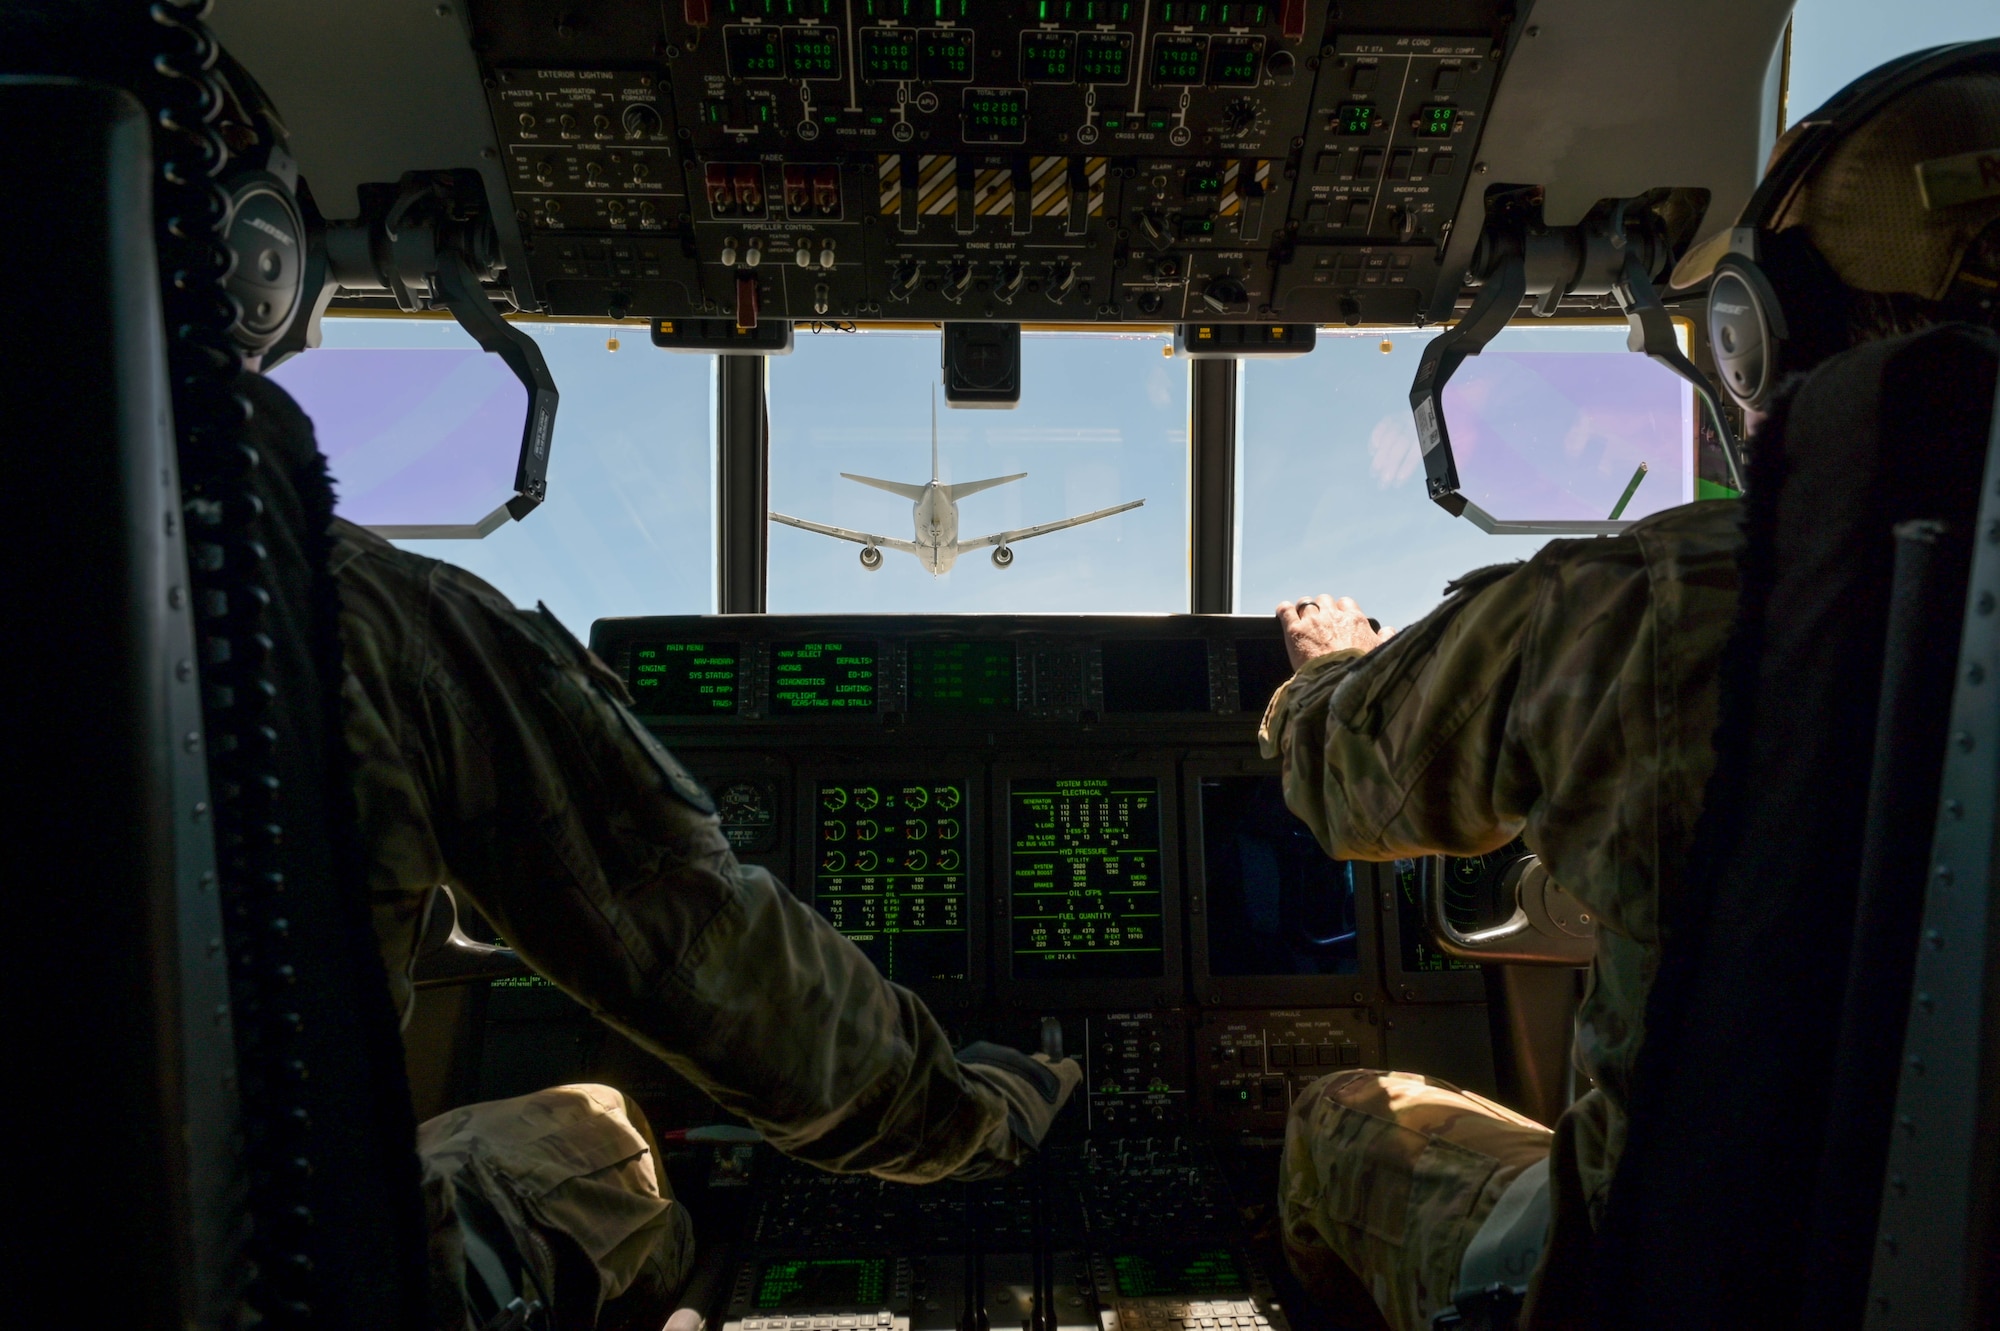 U.S. Air Force Lt. Col. Philip Varilek, left, and Maj. Patrick Robinson, 71st Rescue Squadron HC-130J Combat King II pilots, prepare to receive fuel from a KC-46A Pegasus assigned to the 916th Air Refueling Wing, Seymour Johnson Air Force Base, North Carolina, during a flight near Moody Air Force Base, Georgia, Aug. 24, 2021. The KC-46A’s hose and drogue system adds additional mission capability that is independently operable from the refueling boom system. The 71st RQS is the first operational unit to be refueled by the KC-46A Pegasus. (U.S. Air Force photo by Senior Airman Rebeckah Medeiros)